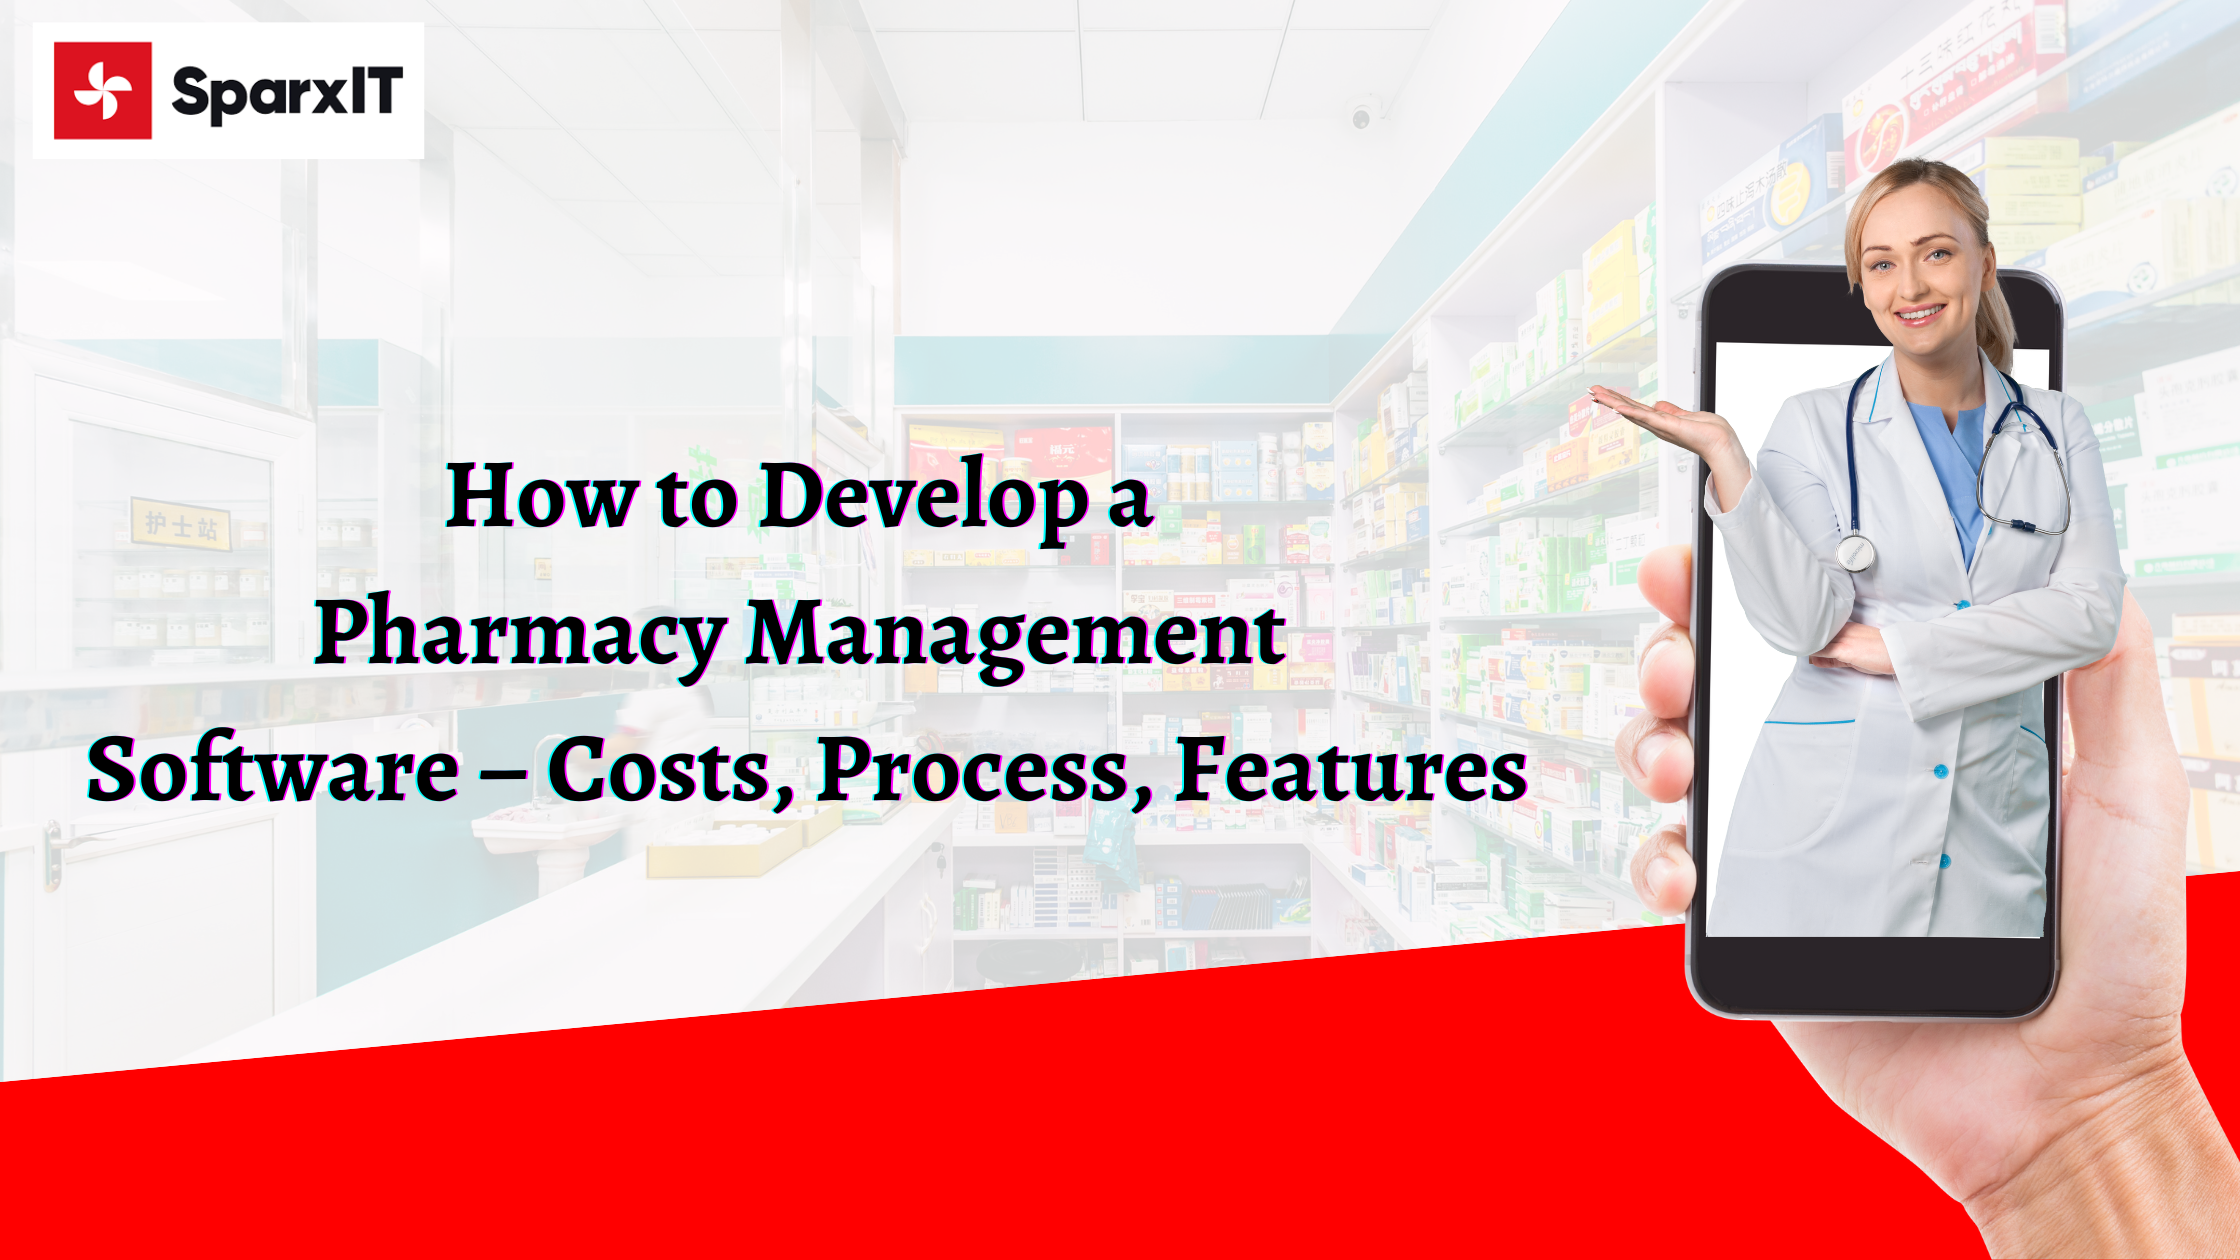 How to Develop a Pharmacy Management Software – Costs, Process, Features